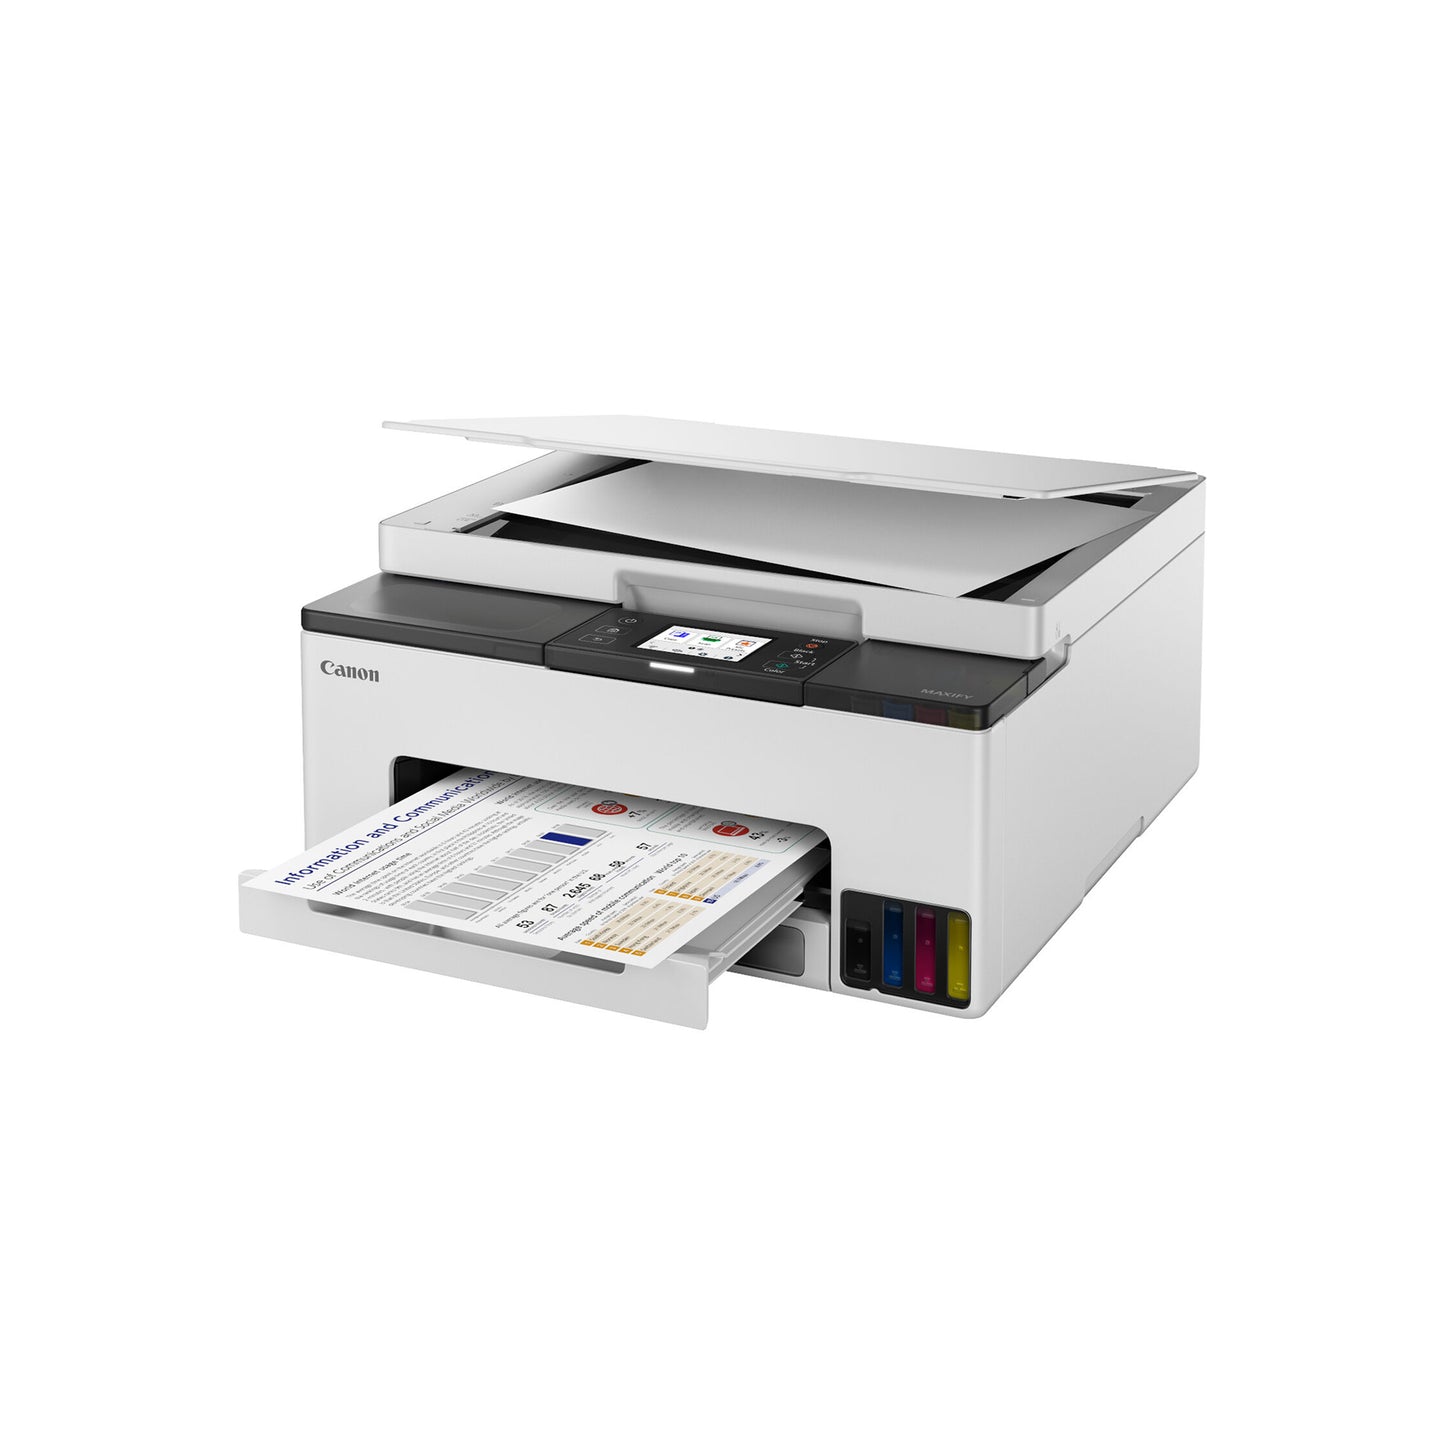 MegaTank MAXIFY GX7020 Wireless Small Office All-in-One Printer